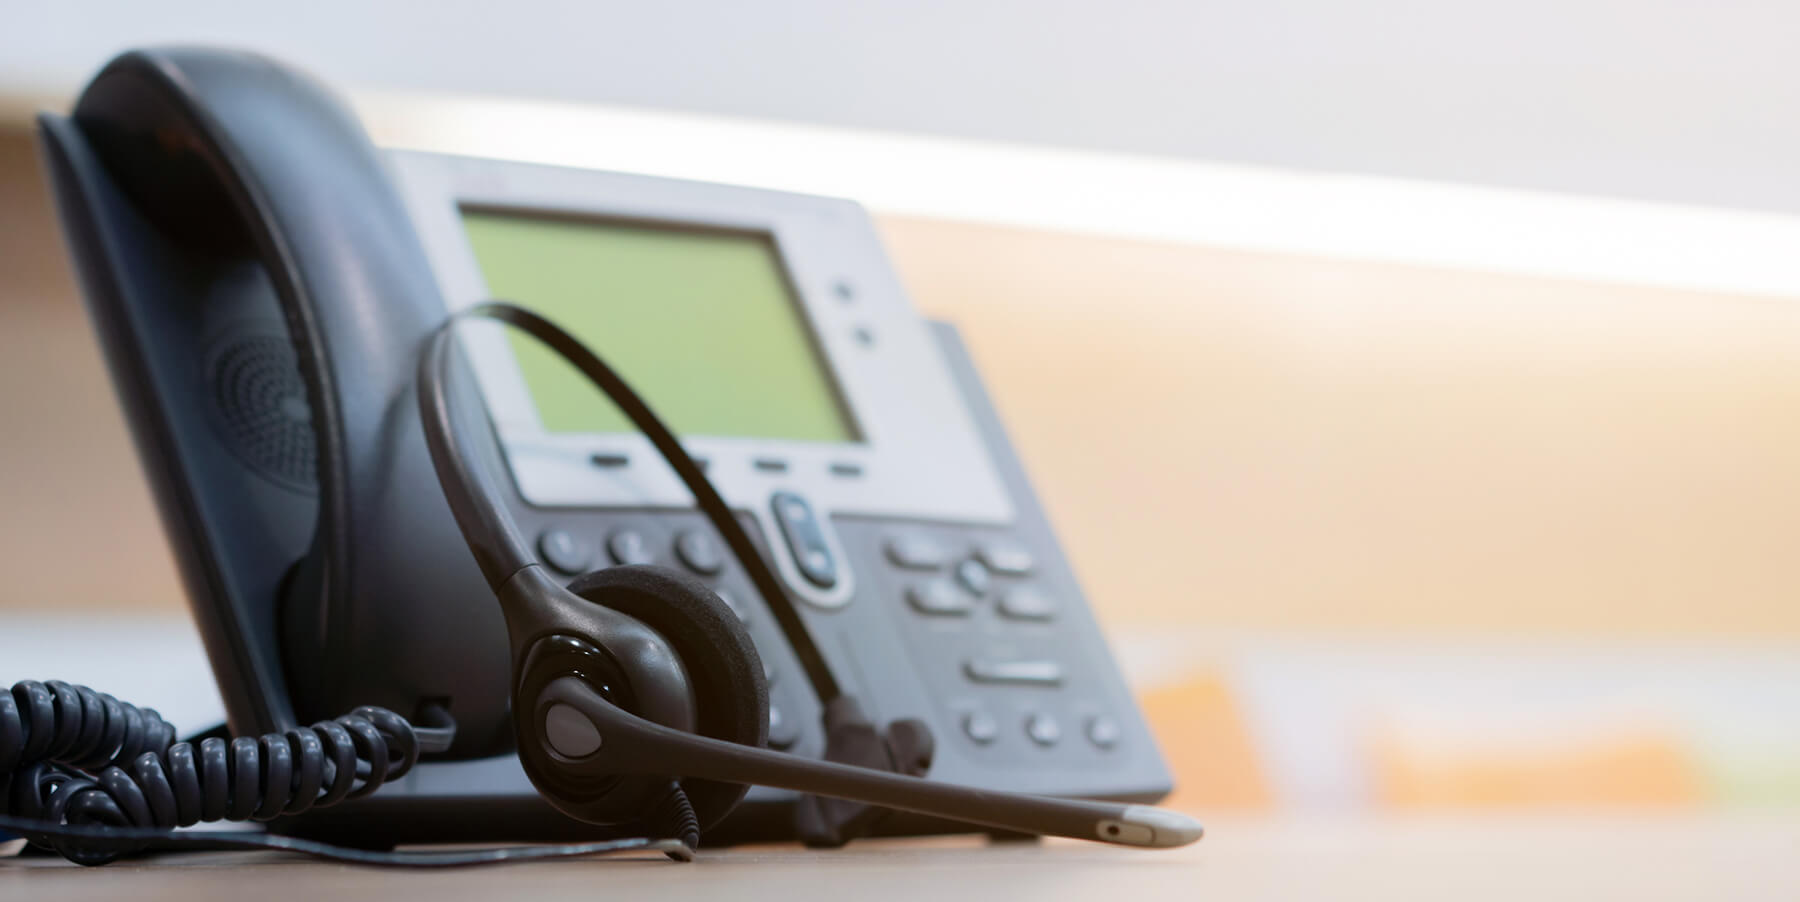 A call center phone and headset sit on a desk